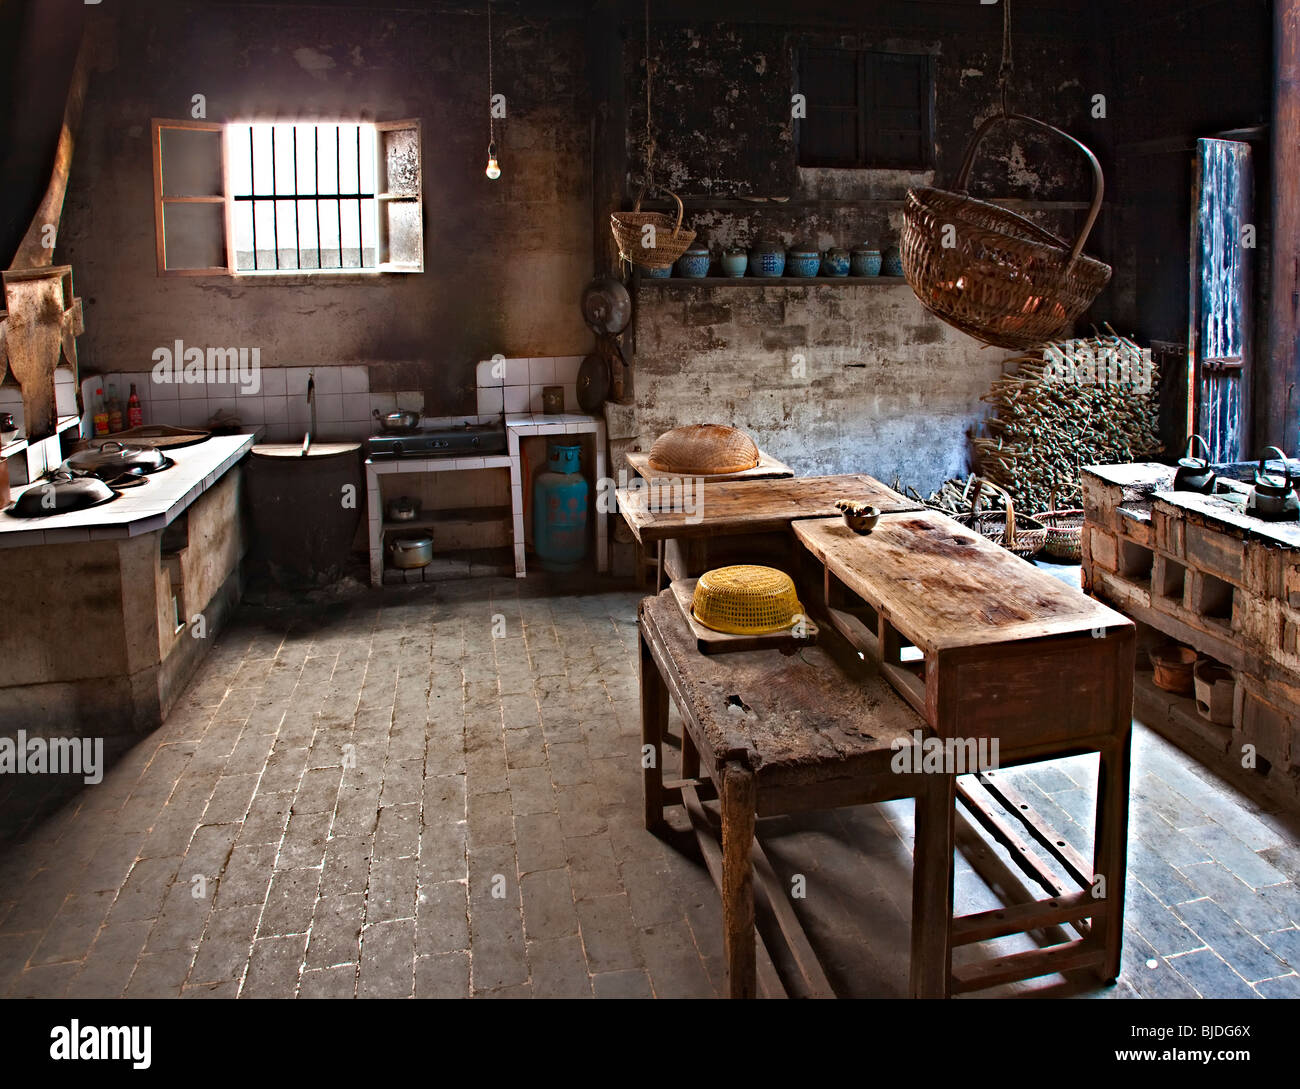 A traditional style kitchen in a residence at rural Chinese village